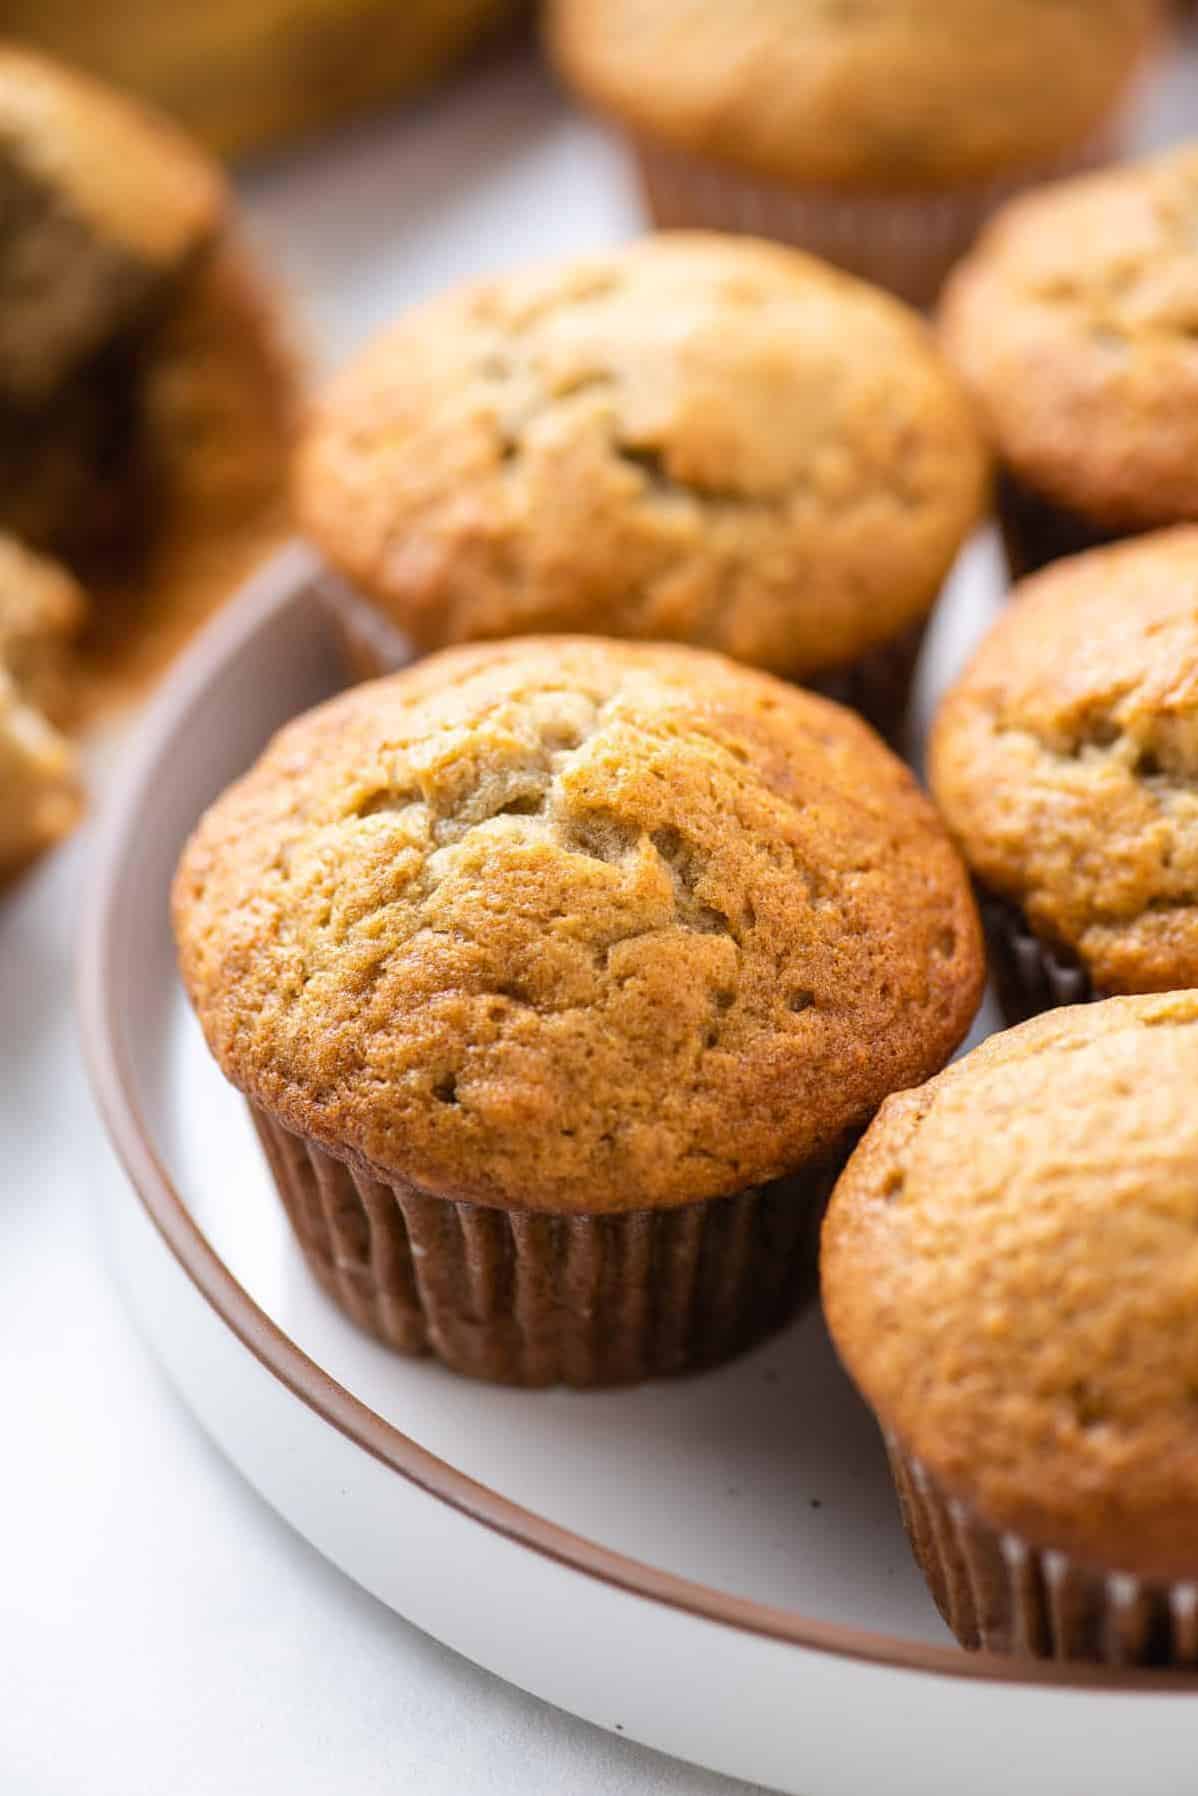  You won't even miss the fat in these muffins thanks to the natural sweetness of ripe bananas.